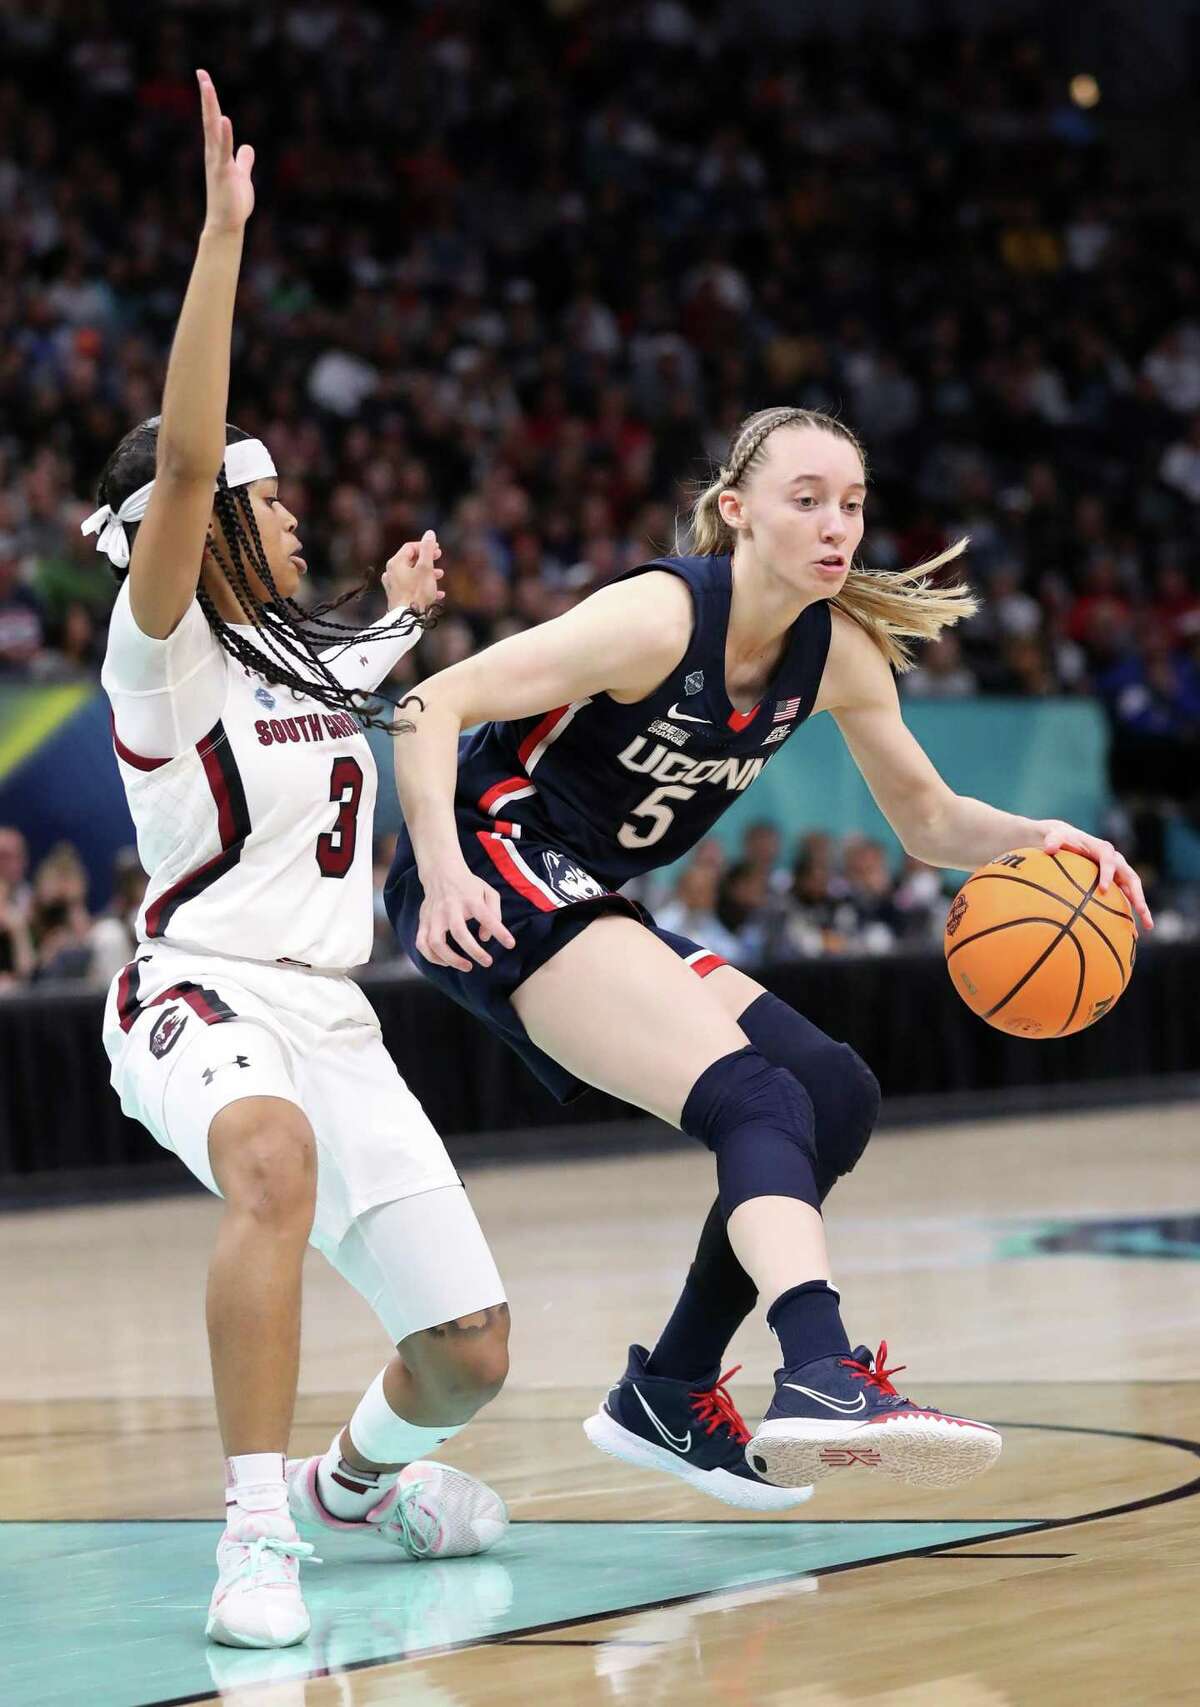 UConn?•s Paige Bueckers dribbles against South Carolina?•s Destanni Henderson in 2nd quarter during NCAA Division 1 Women?•s Basketball Championship Game at Target Center in Minneapolis, MN on Sunday, April 3, 2022.